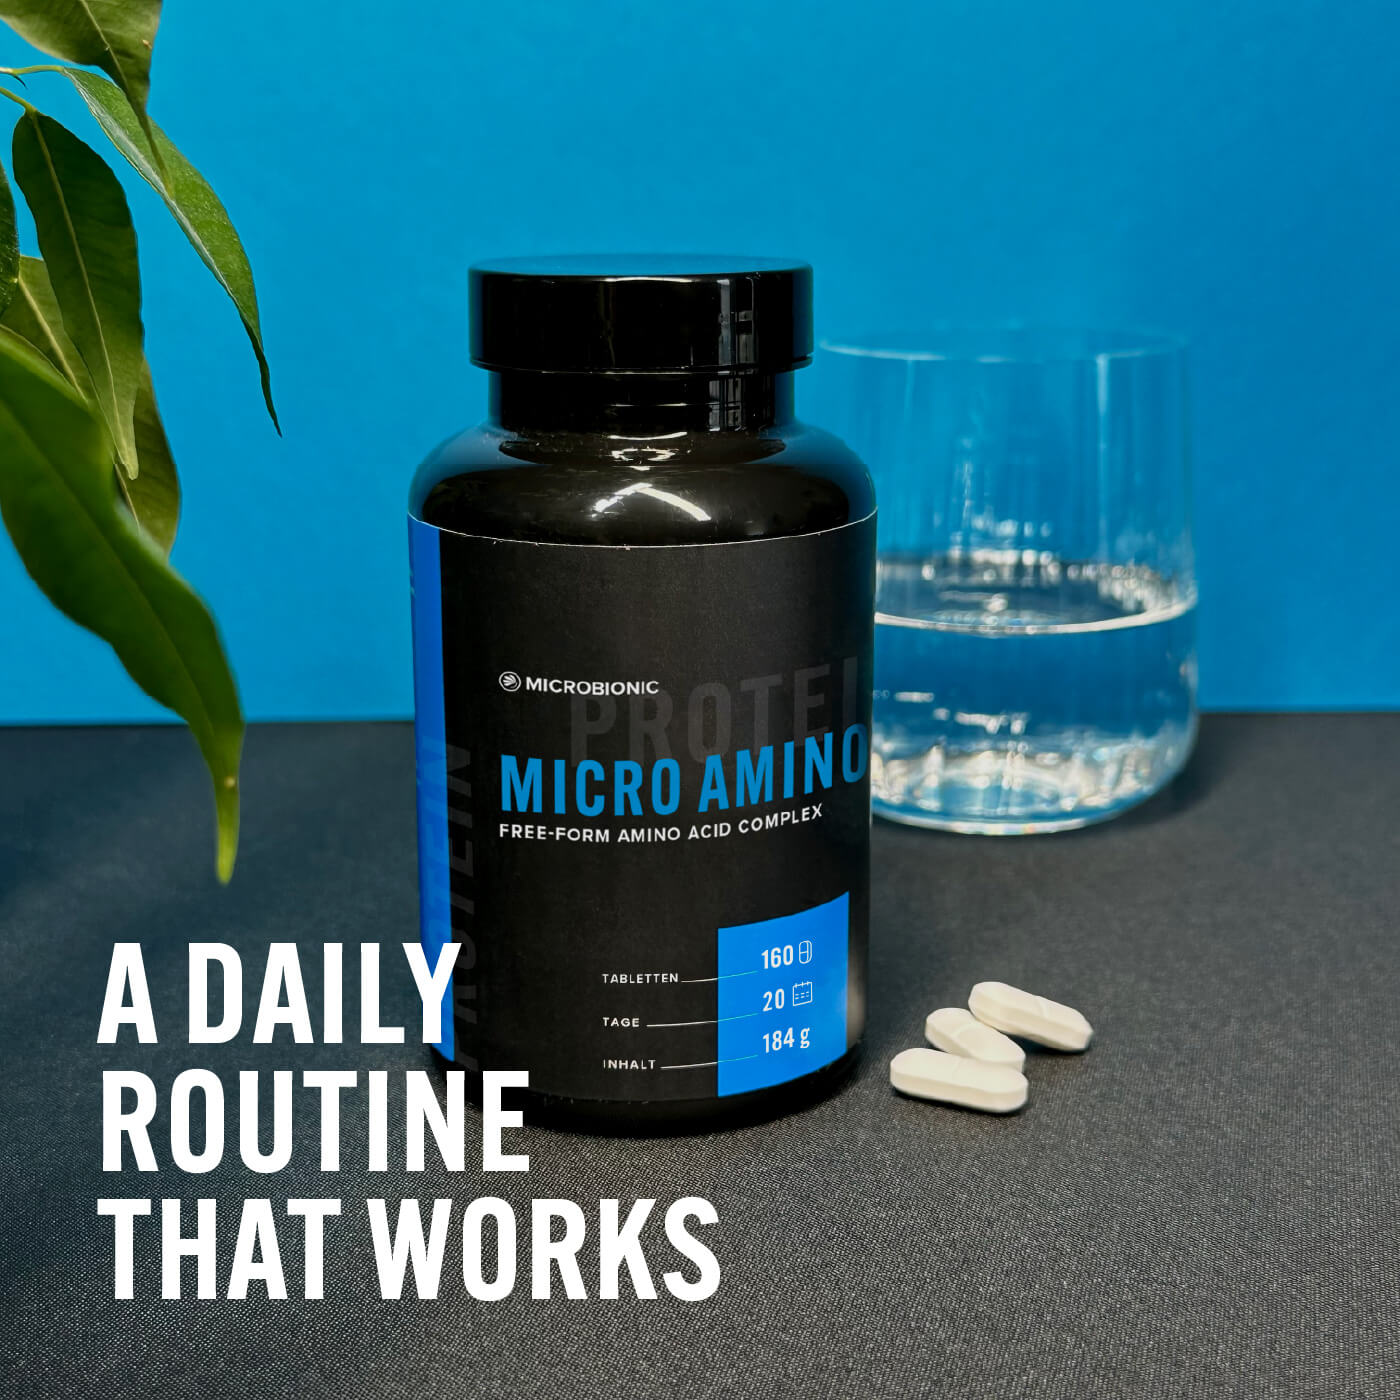 Micro Amino – A Daily Routine That Works